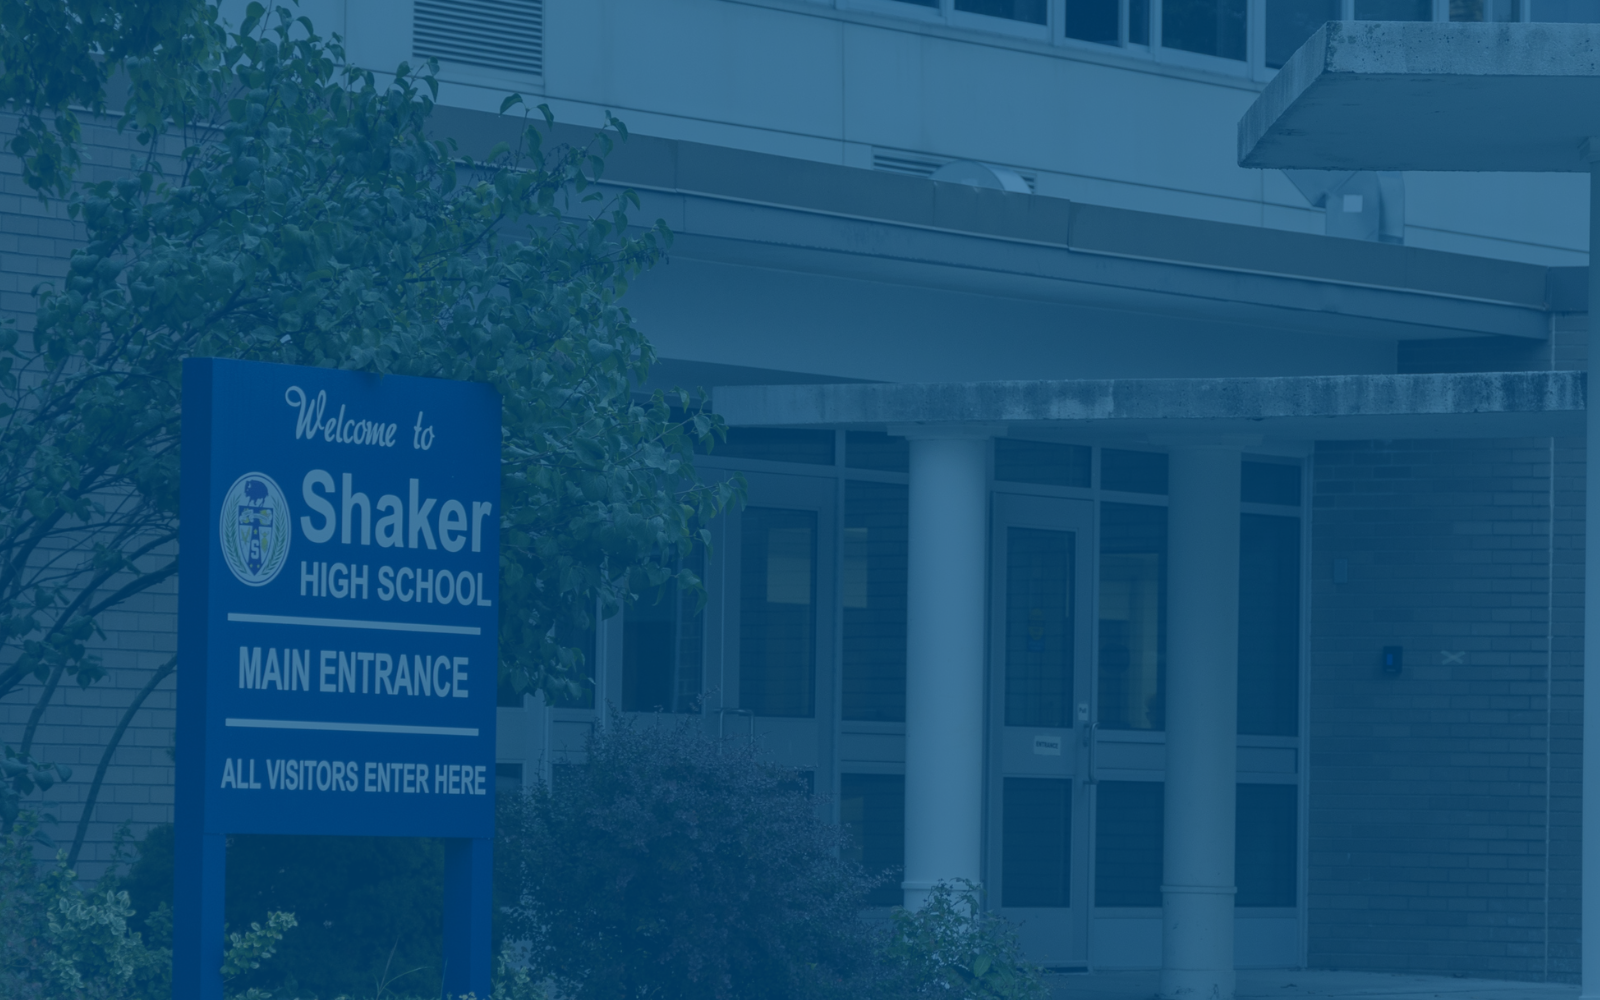 About Shaker High School - North Colonie Central Schools